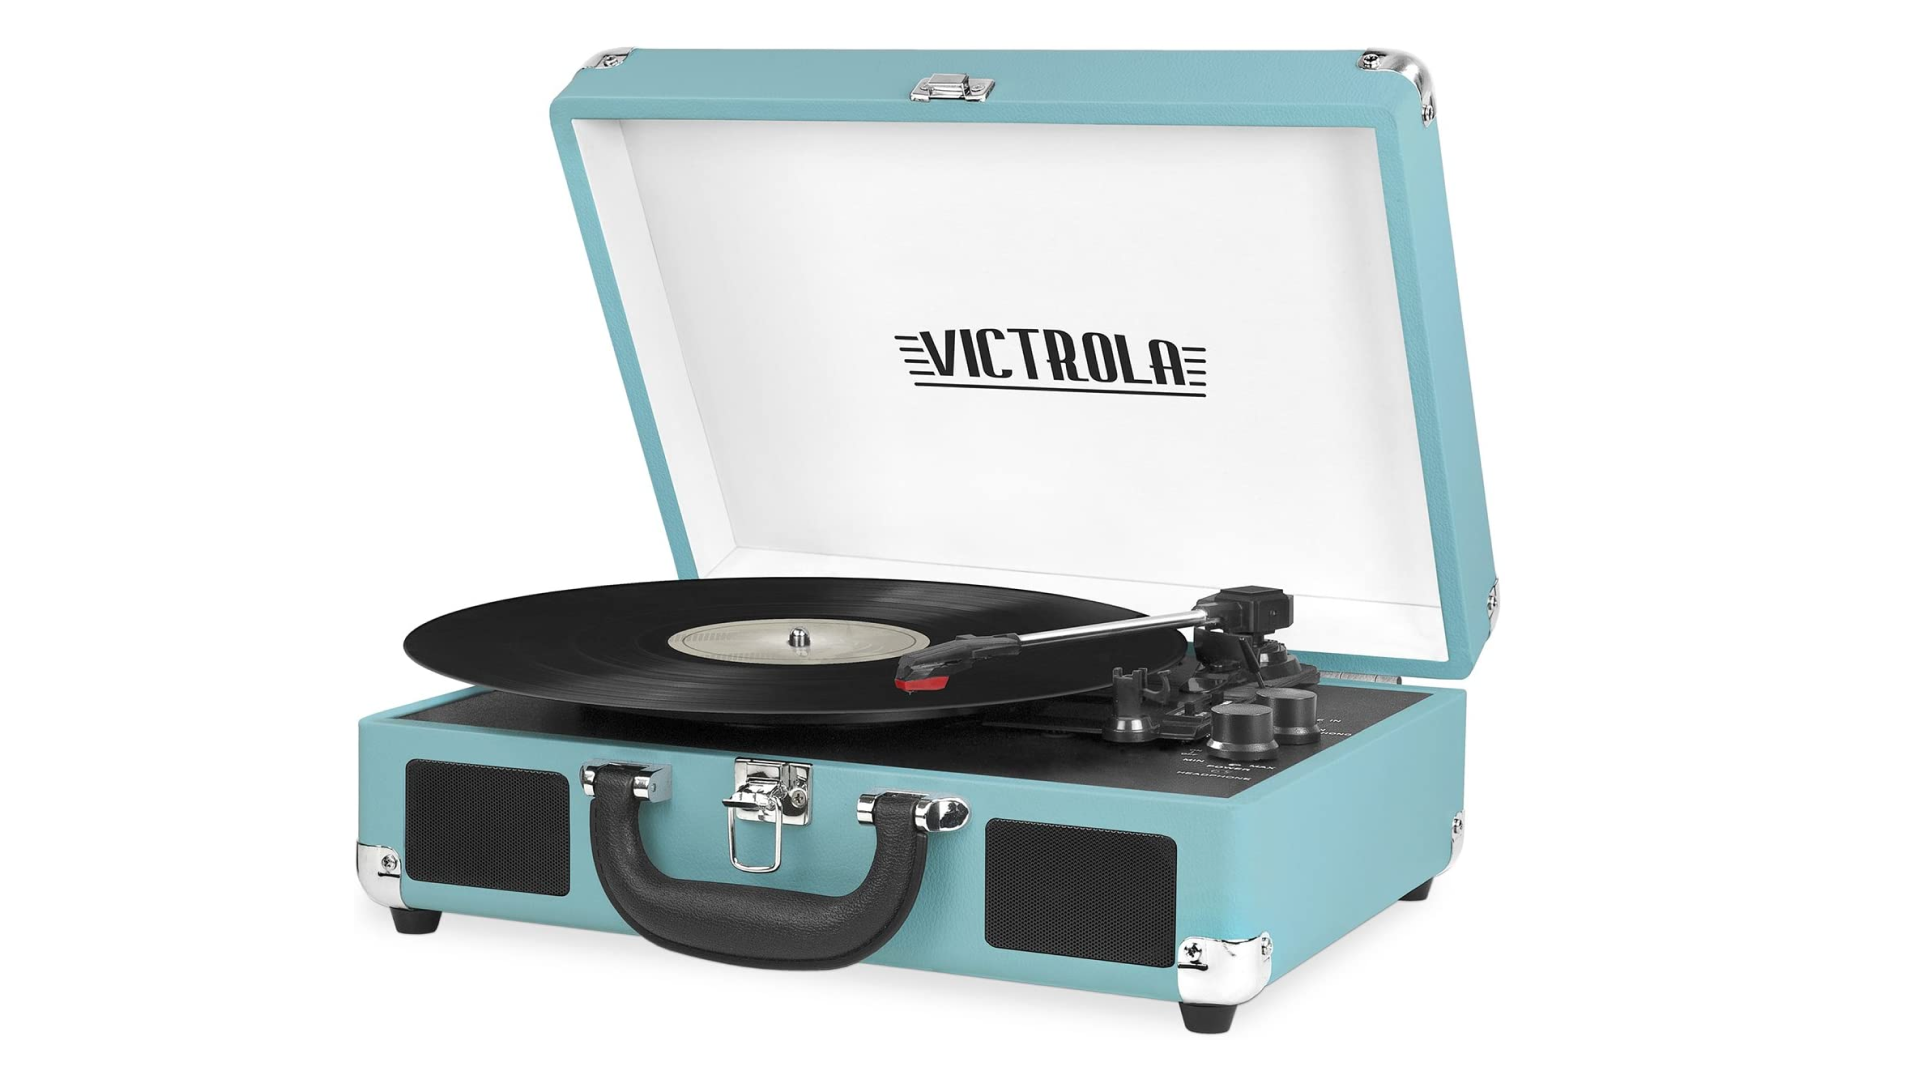 Retro-looking record player